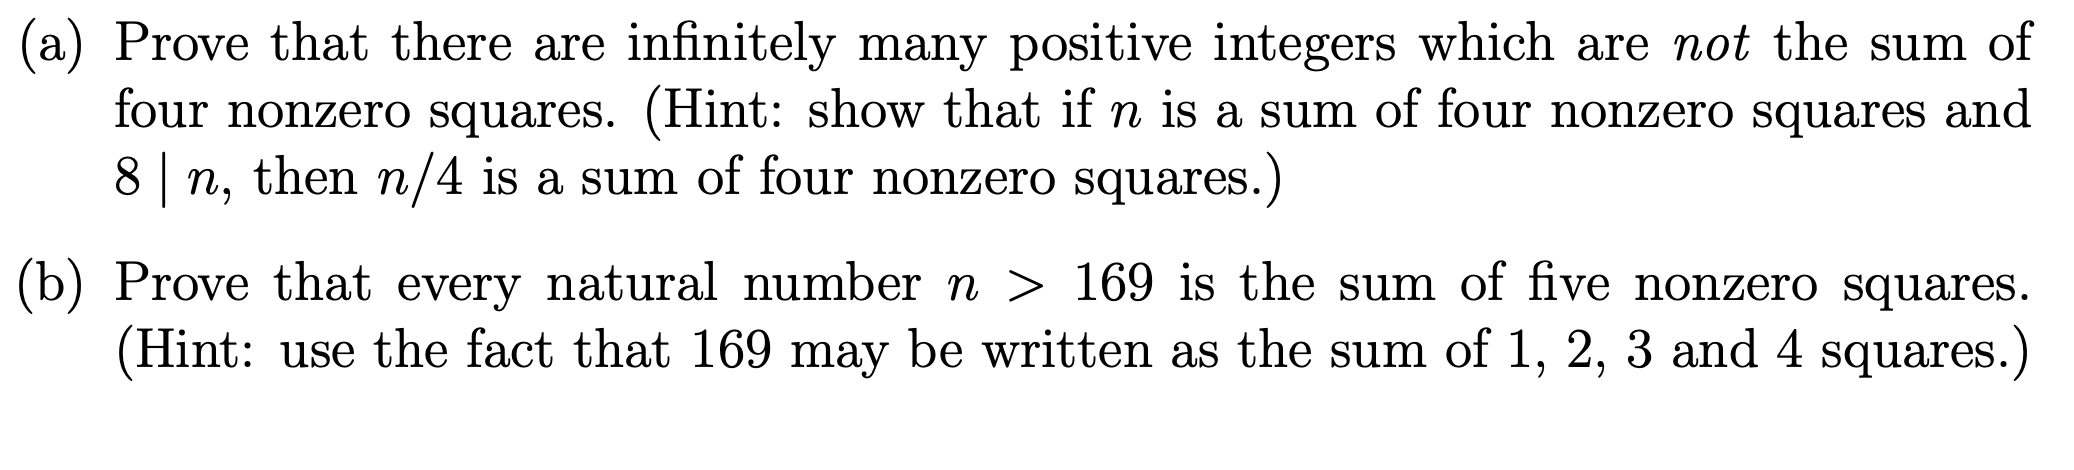 Solved QUADRA range's Four-Square Theorem) If n is a natural